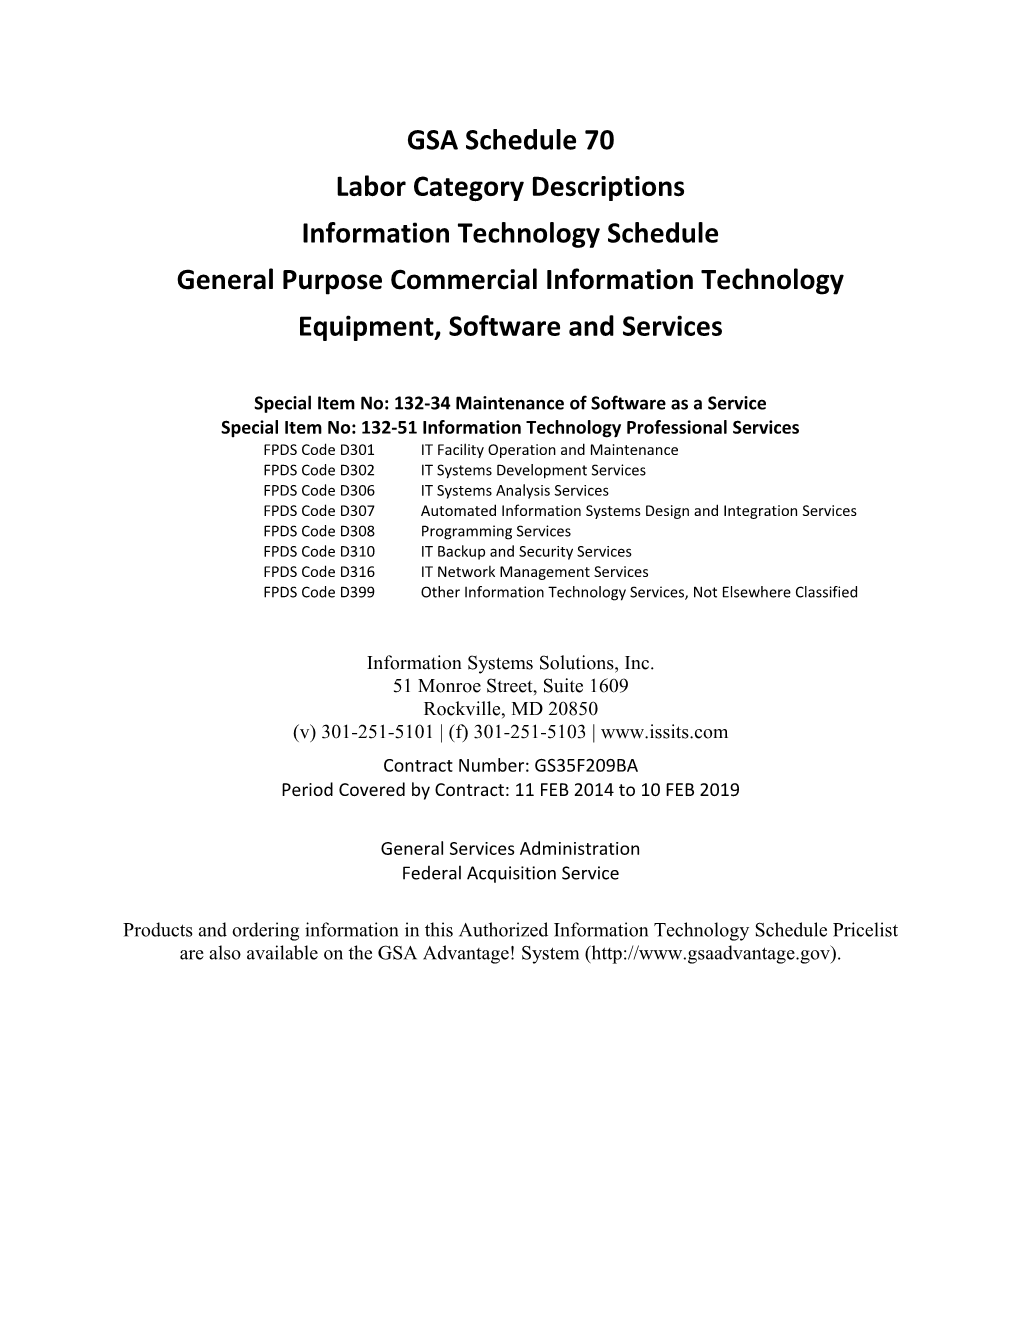 Information Technology Services (Sample)